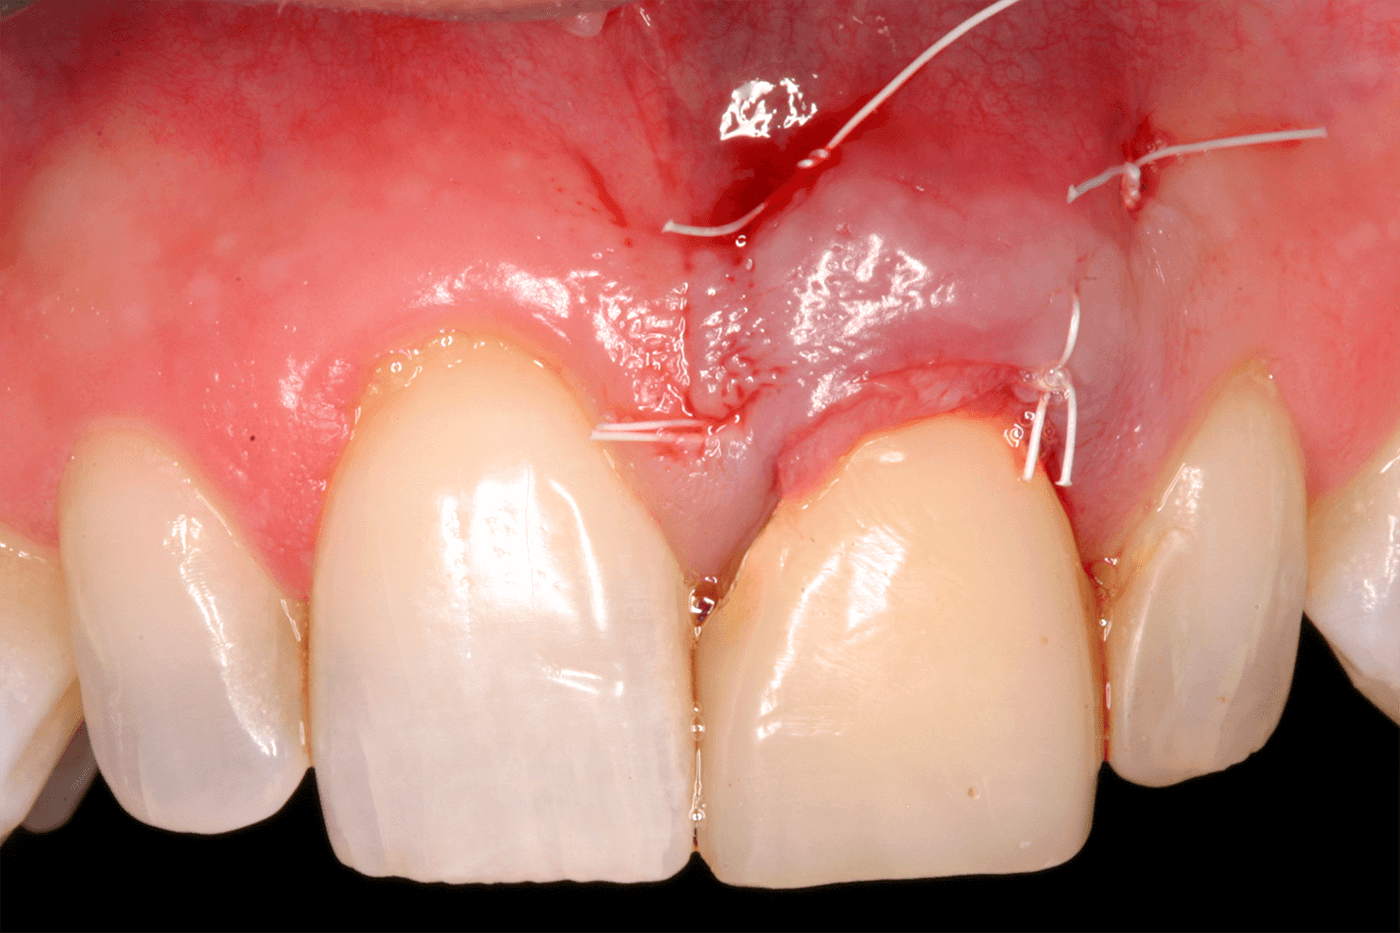 Clinica Pinheiro Torres - Gingival Transparency due to Inadaptation of Metalo-Ceramic Crown